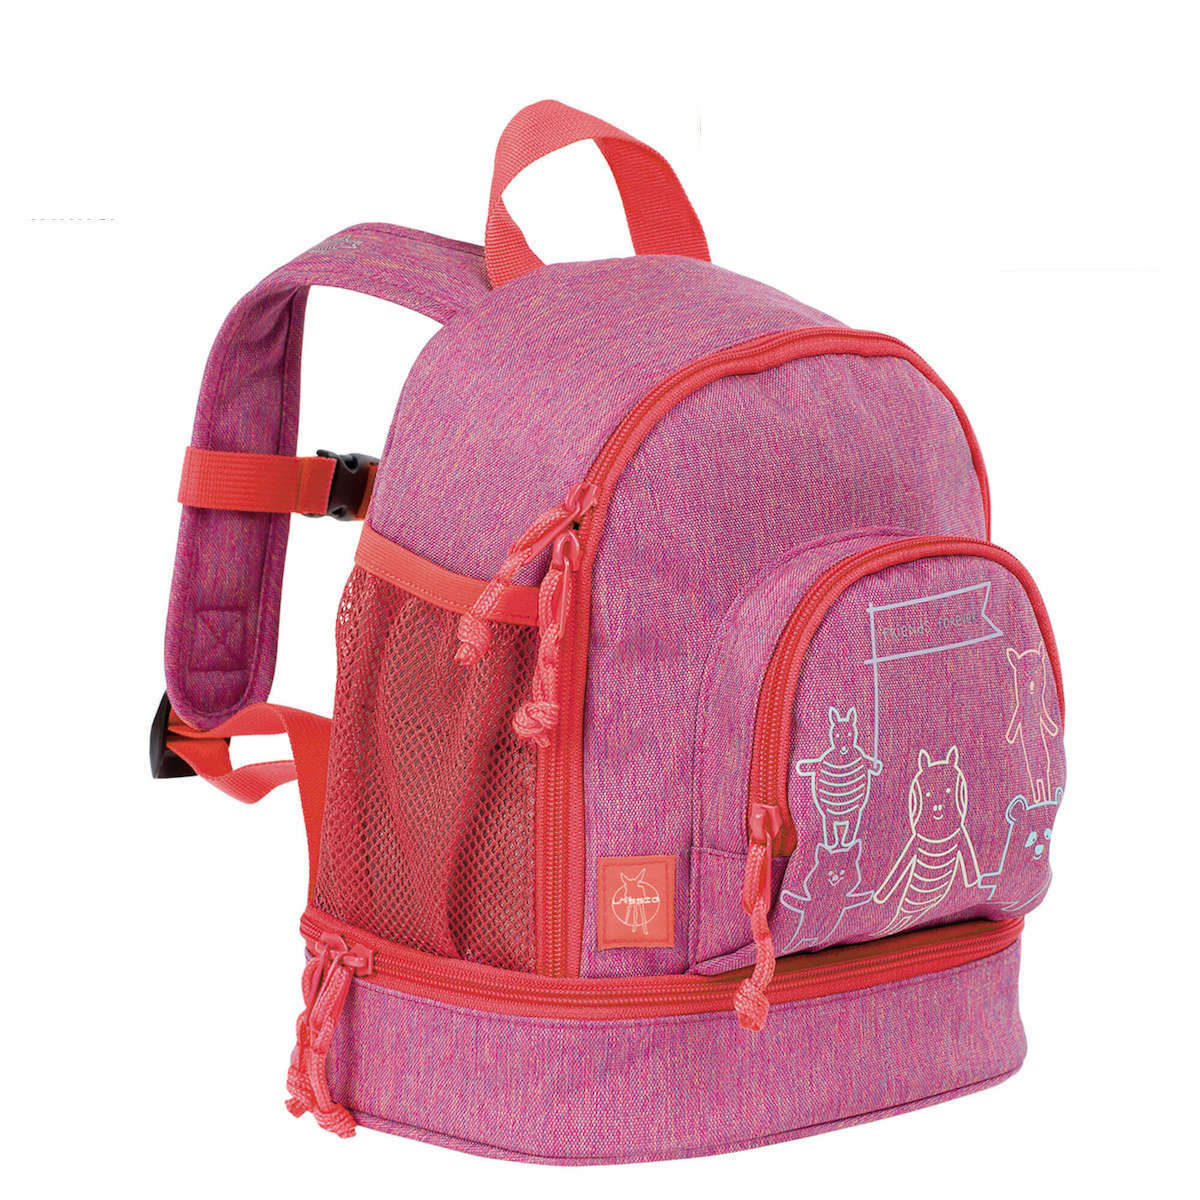 Backpack - Grey - Mini & Baby Friends Kids Lassig Destination About